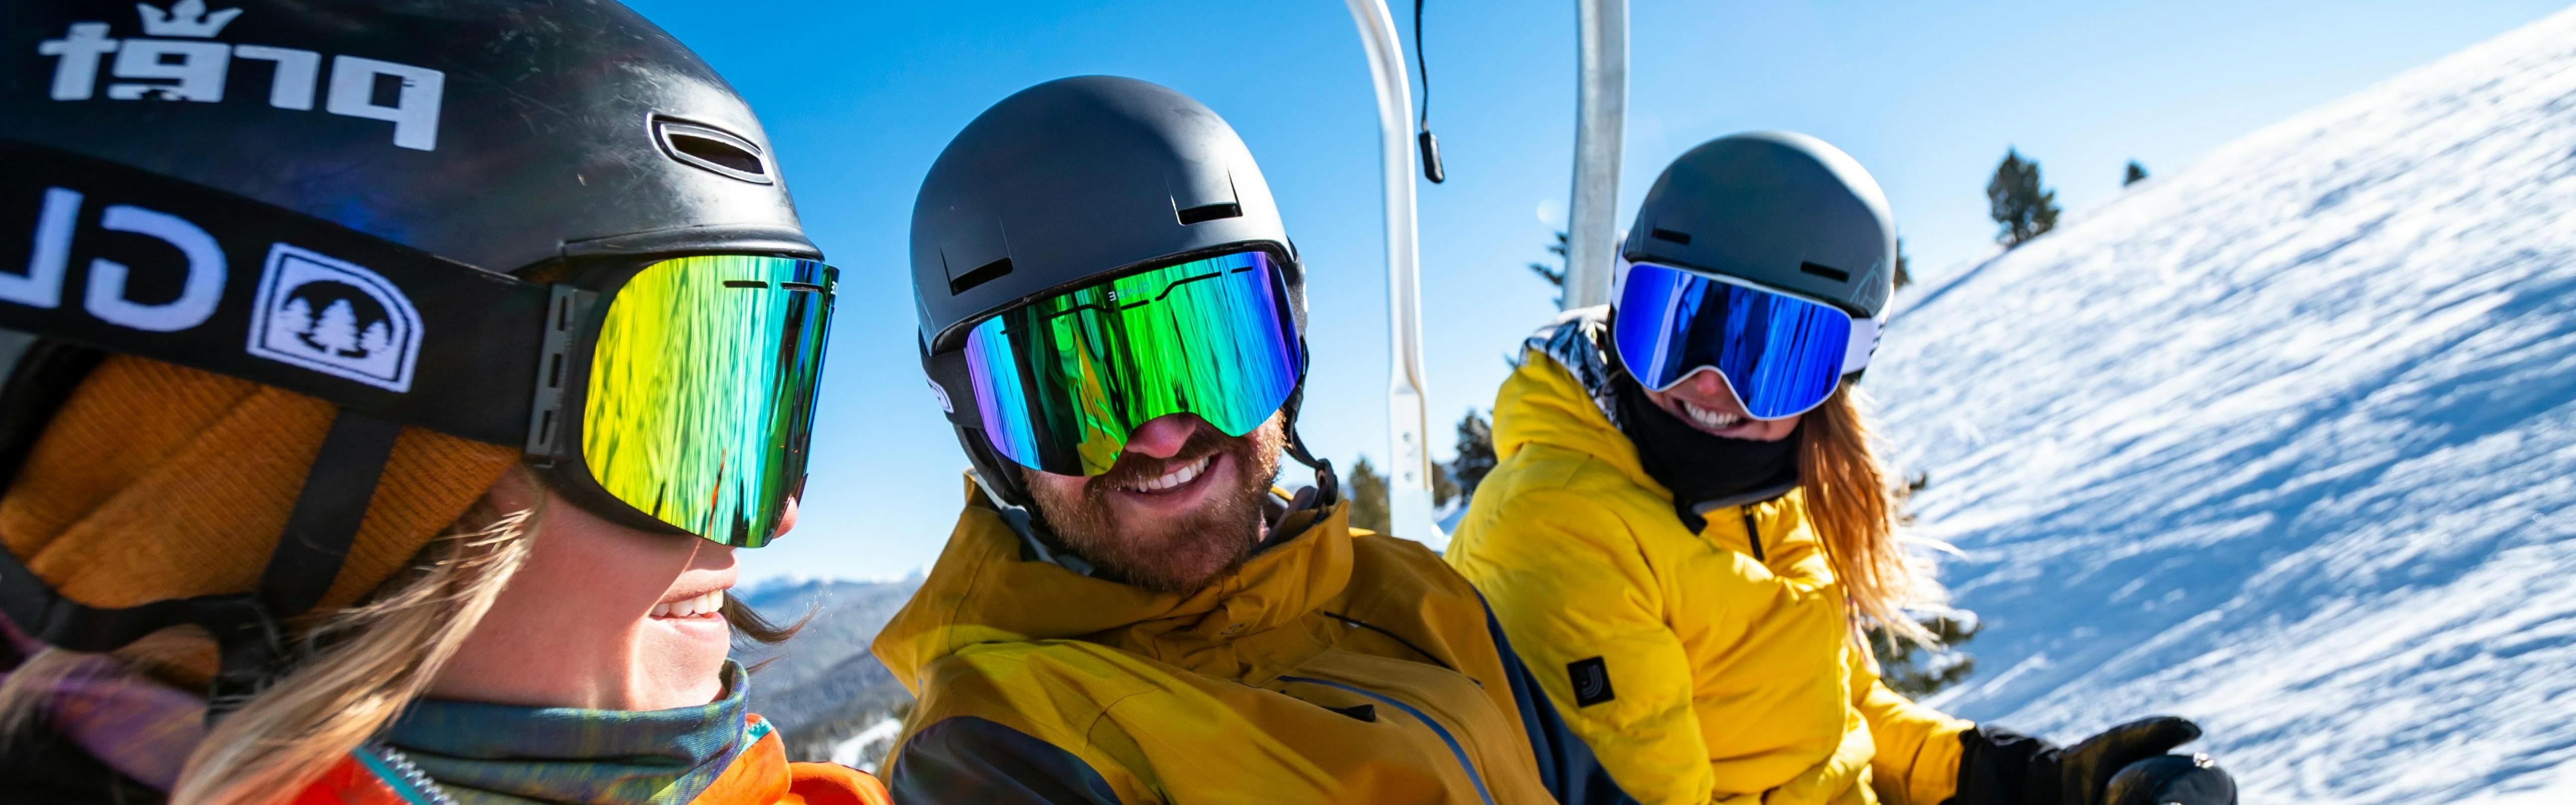 Three people on a chair lift wear ski goggles and helmets and smile at each other.